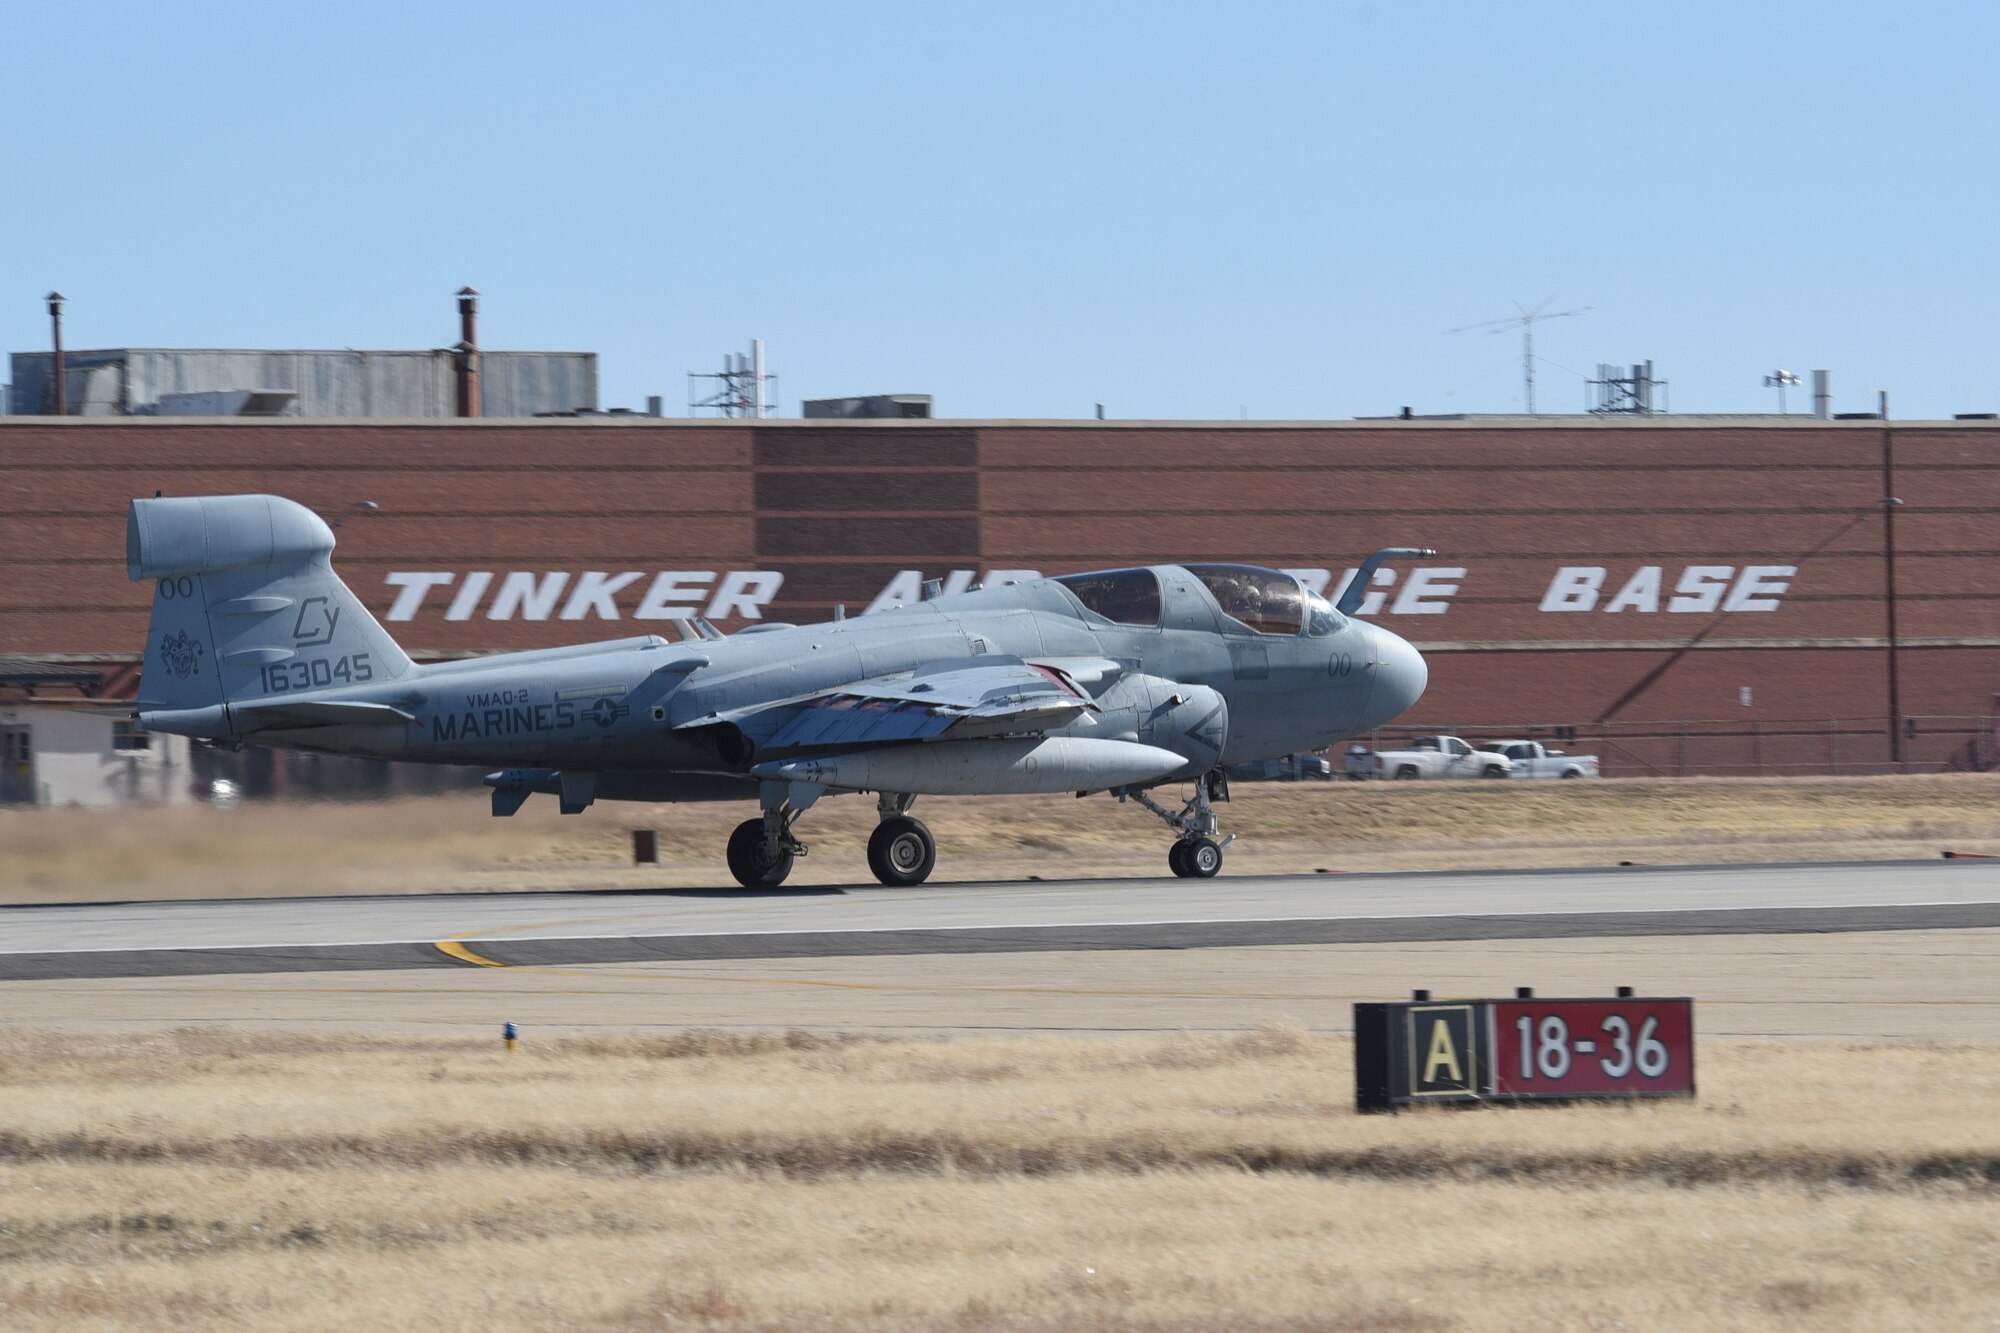 A United States Marine Corps EA-6B Prowler of 
VMAQ-2 'Jesters' accelerates down Tinker's runway 18 marking the final take-off before delivery to long-term storage at Davis-Monthan Air Force Base, Arizona on Nov. 29, 2018, at Tinker Air Force Base, Oklahoma. The base was chosen as a final fueling point for the aircraft being ferried from Marine Corps Air Station Cherry Point, North Carlina due to the famous hospitality and professionalism of Tinker's Transient Alert services. The jet is crewed by USMC Captains' Aaron 'Bambi' Staggs, electronic counter-measures officer, David 'Nicole' Richey, ECMO, and Evan 'Fonix' Bottorff, pilot.